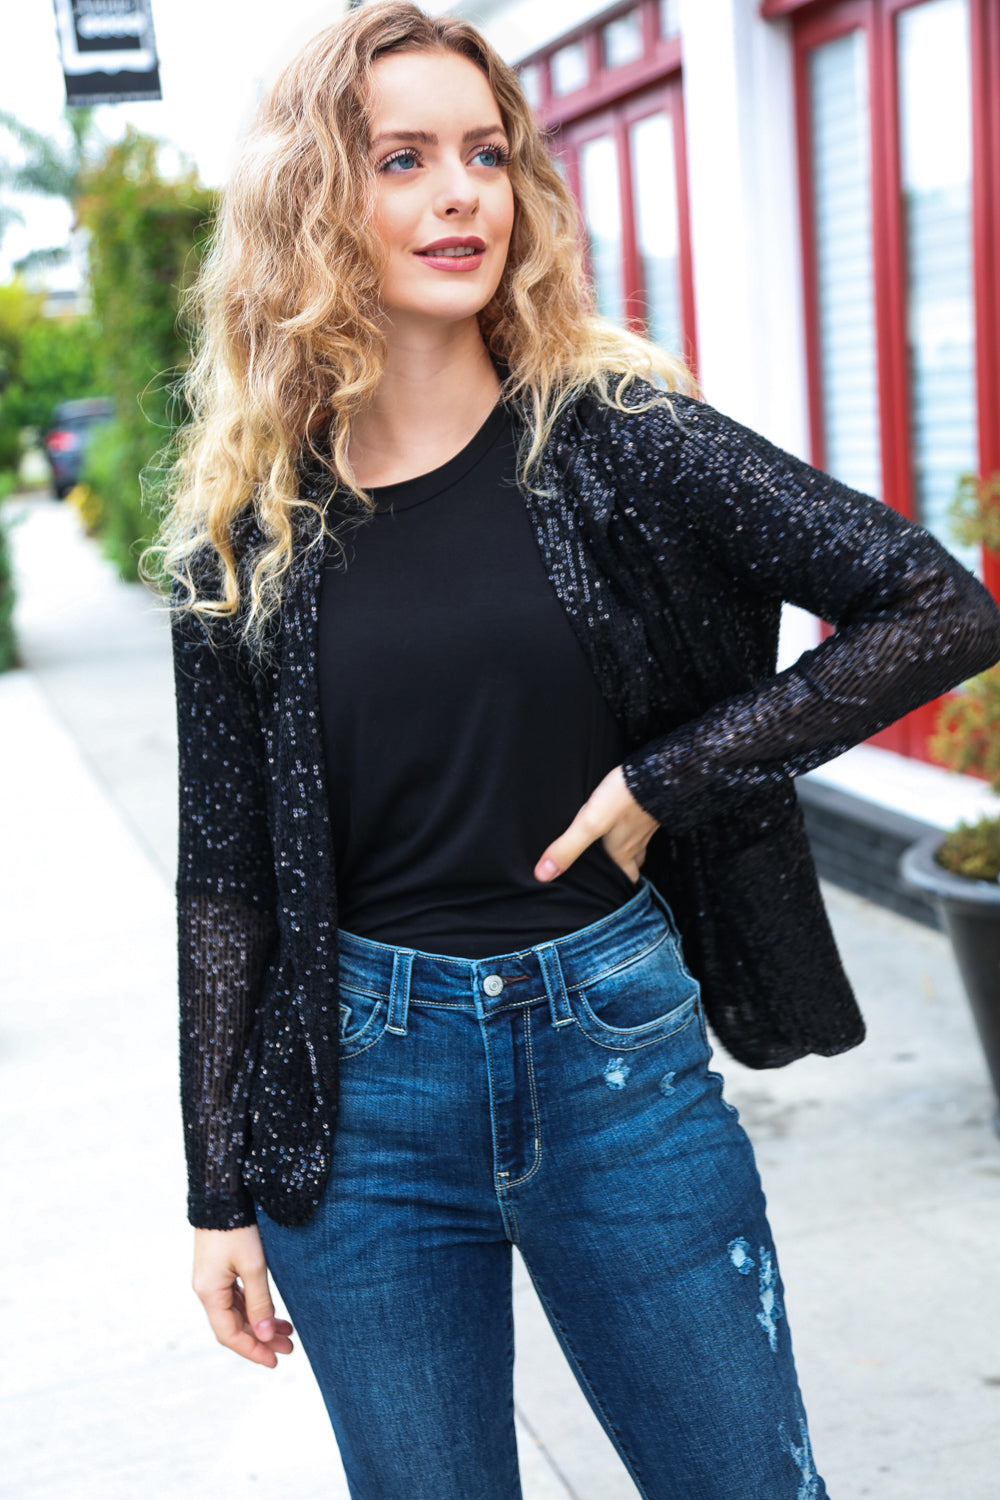 Be Your Own Star Sequin Blazer in Black